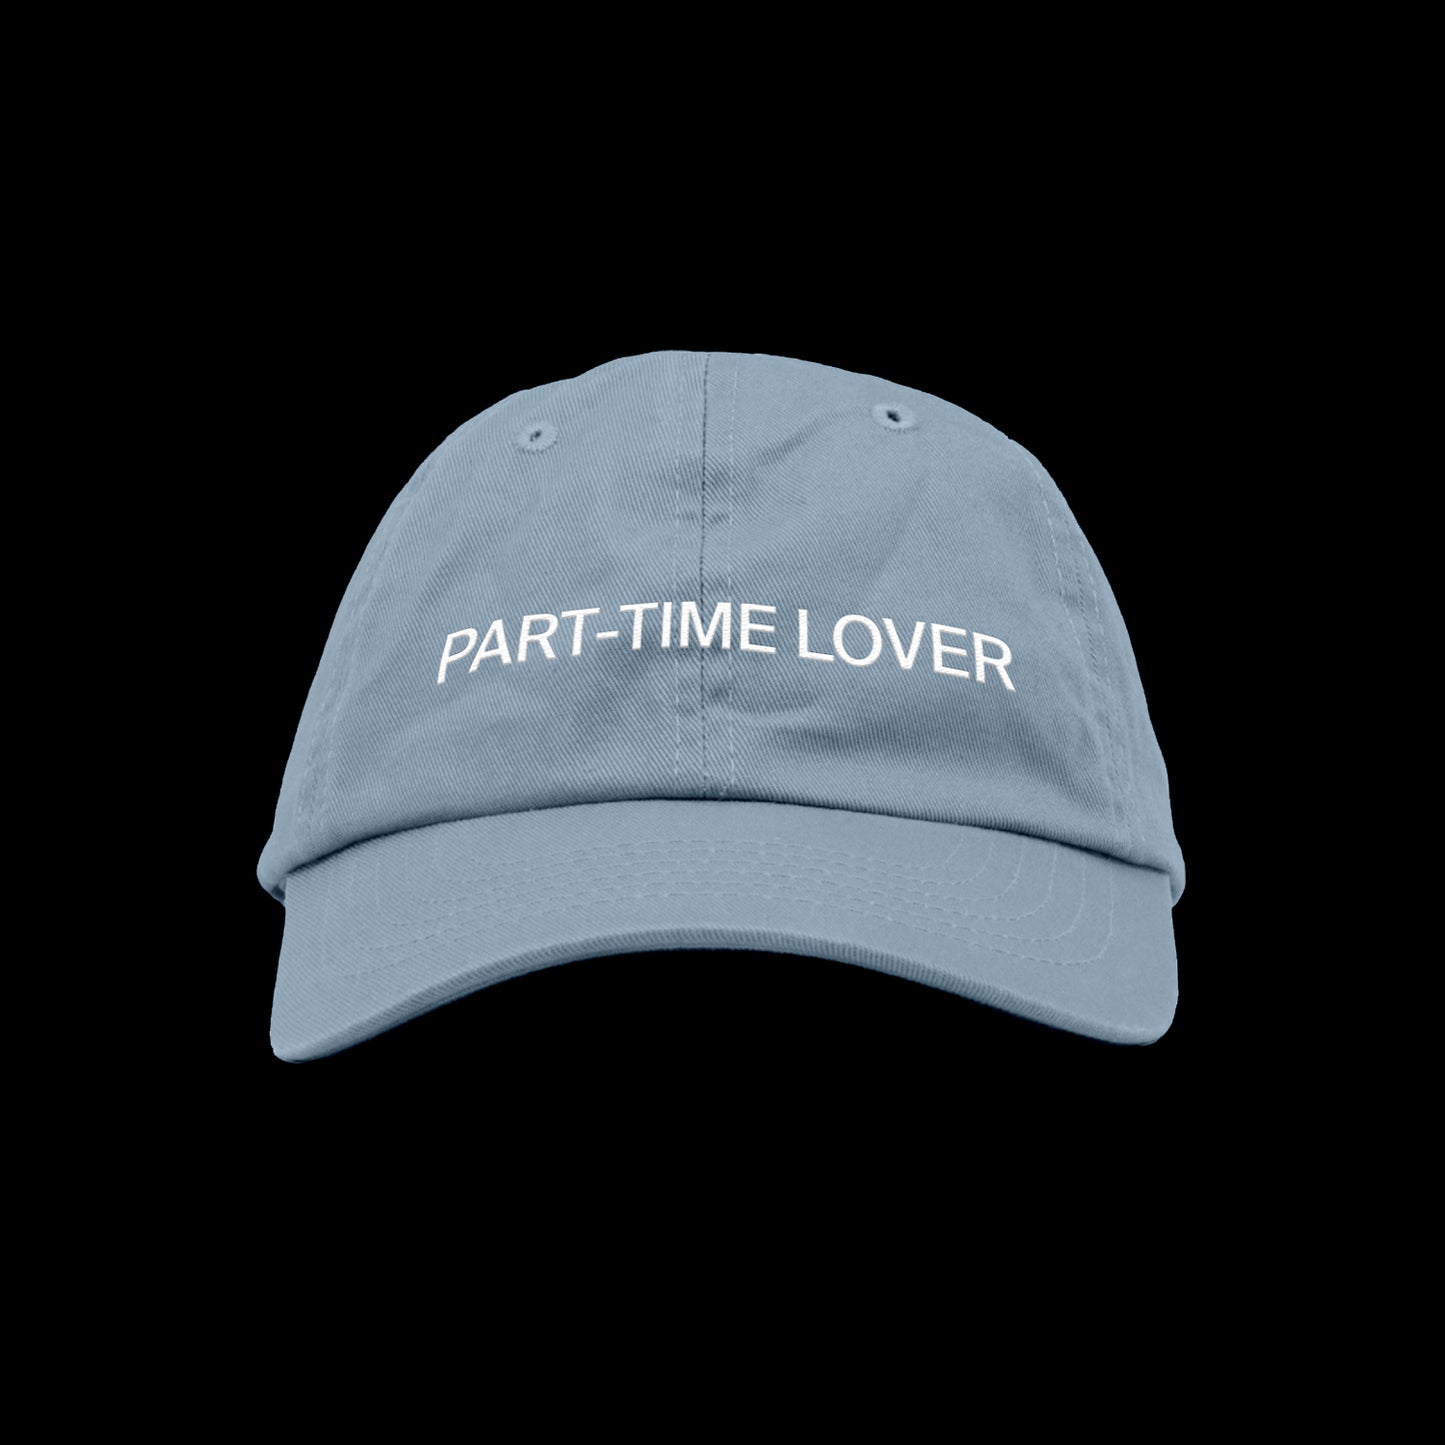 PART-TIME LOVER